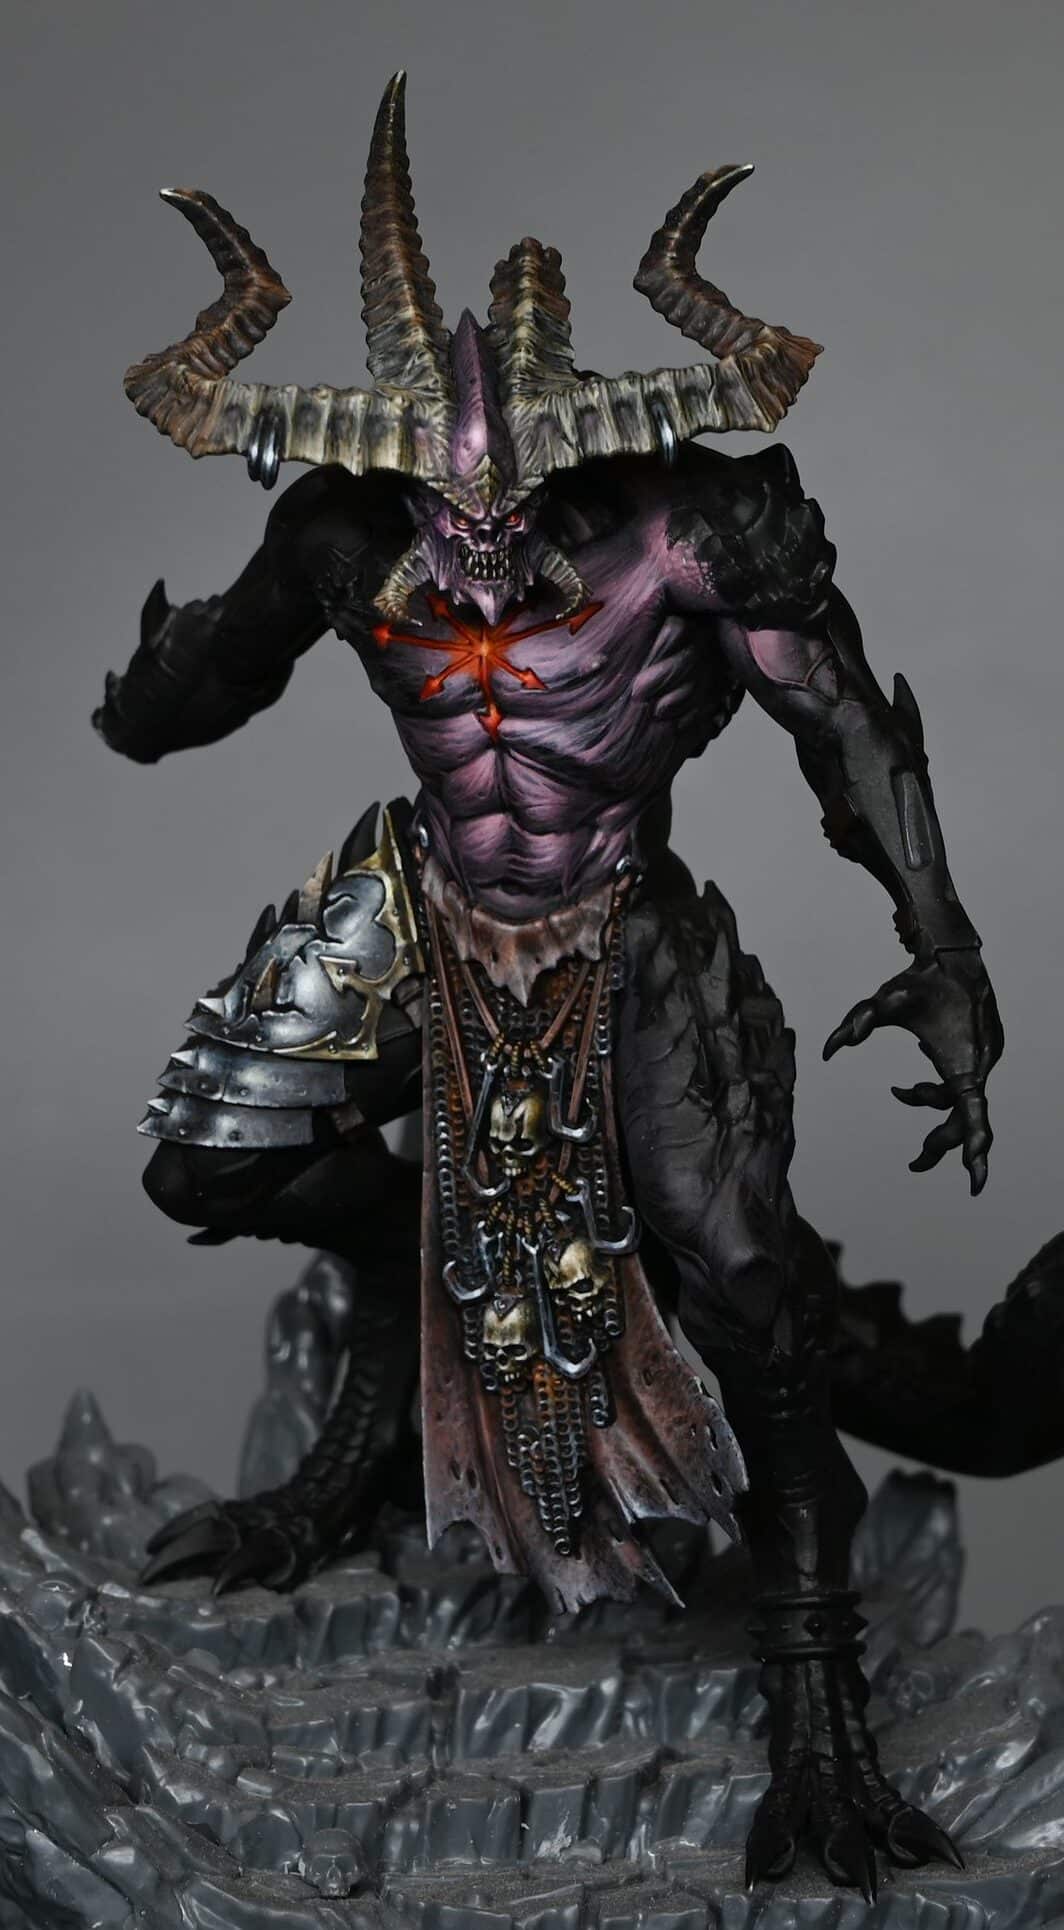 How to Paint Be’lakor, the Dark Master